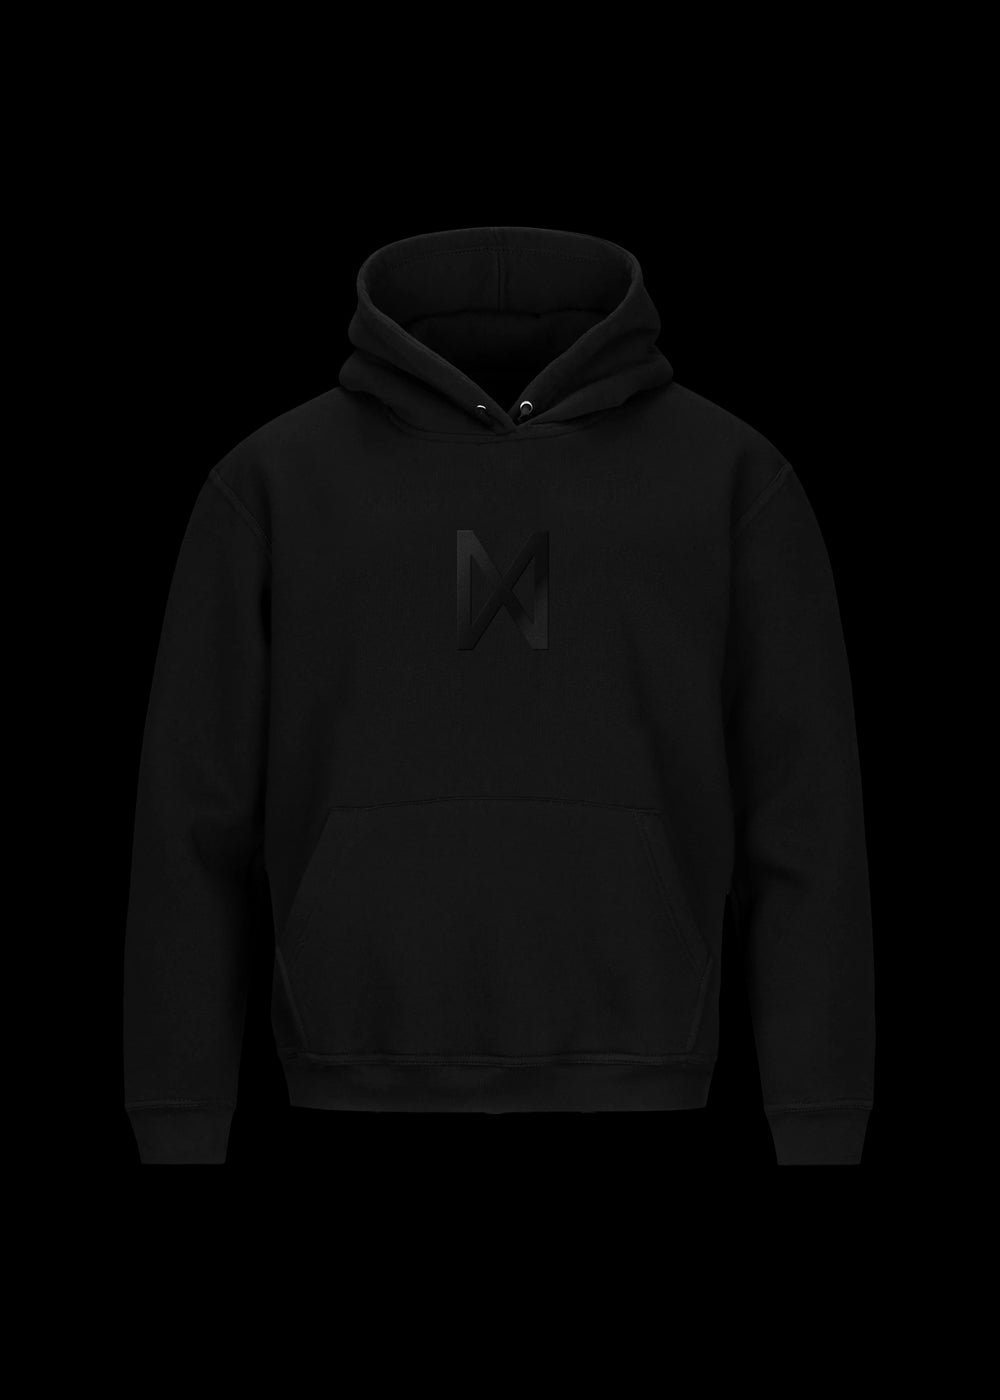 Dagaz Rune Black Hoodie combines both Norse Mythology and minimalist aesthetic. Black thread is embroidered on black hoodie. If Norse Mythology and minimalism is your thing, this is for you.